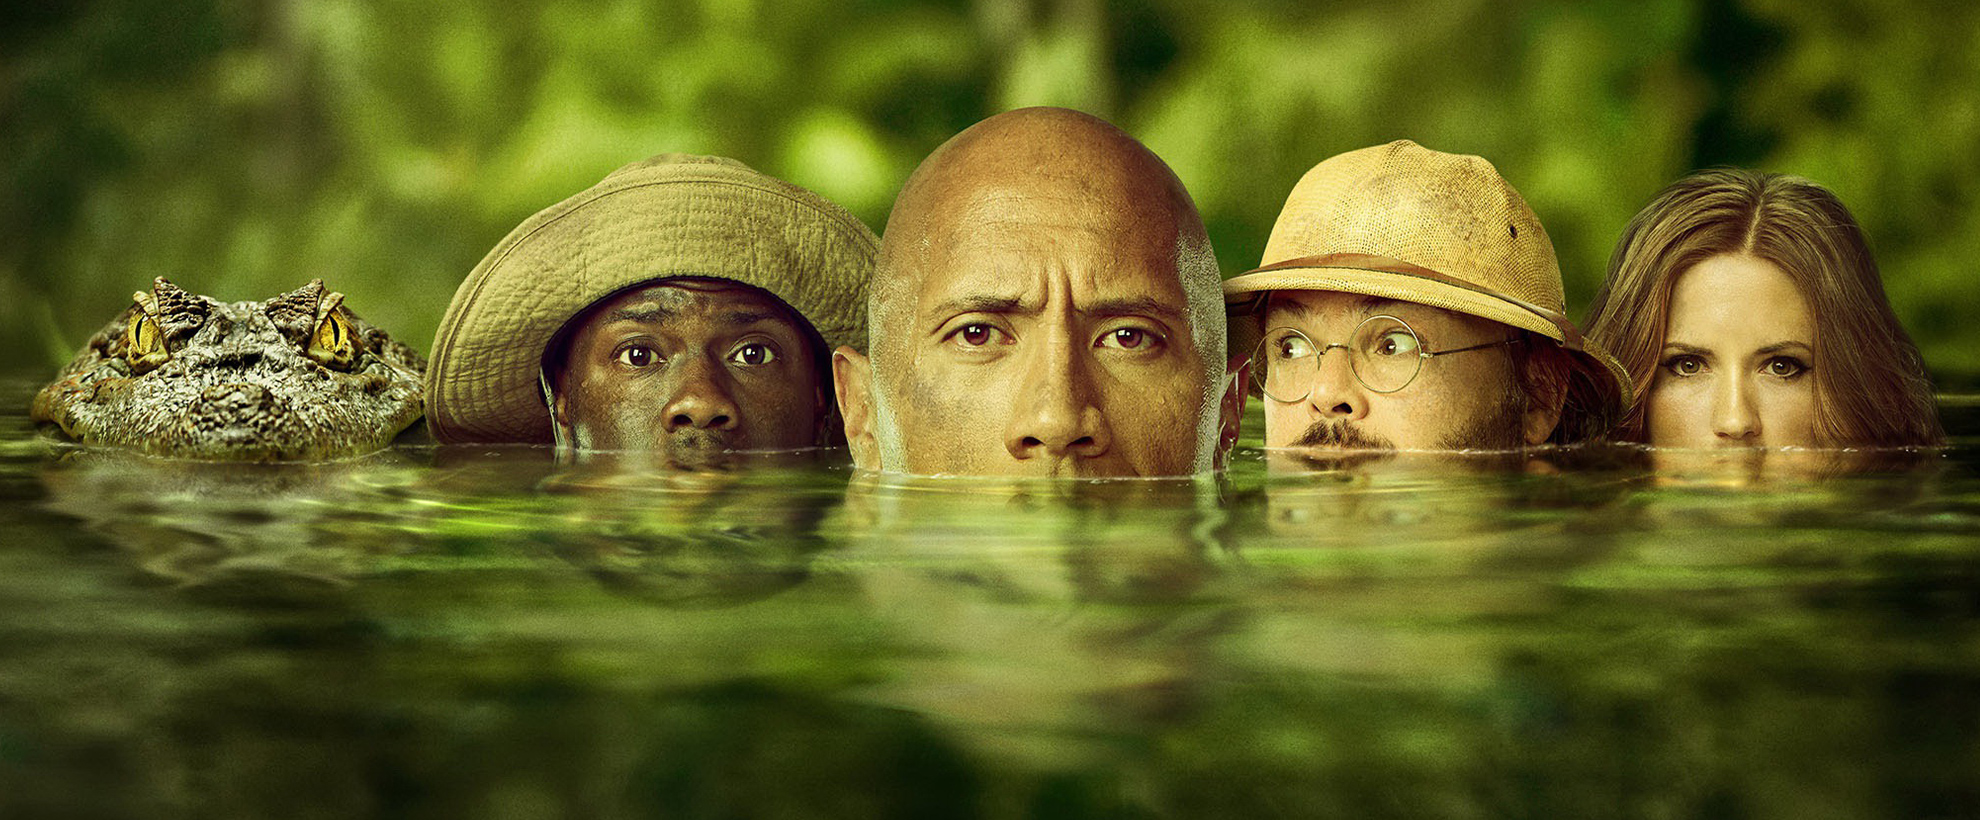 Dwayne Johnson, Kevin Hart, Jack Black, and Karen Gillan with their faces half submerged into a jungle river, on the far left next to Kevin is a crocodile 